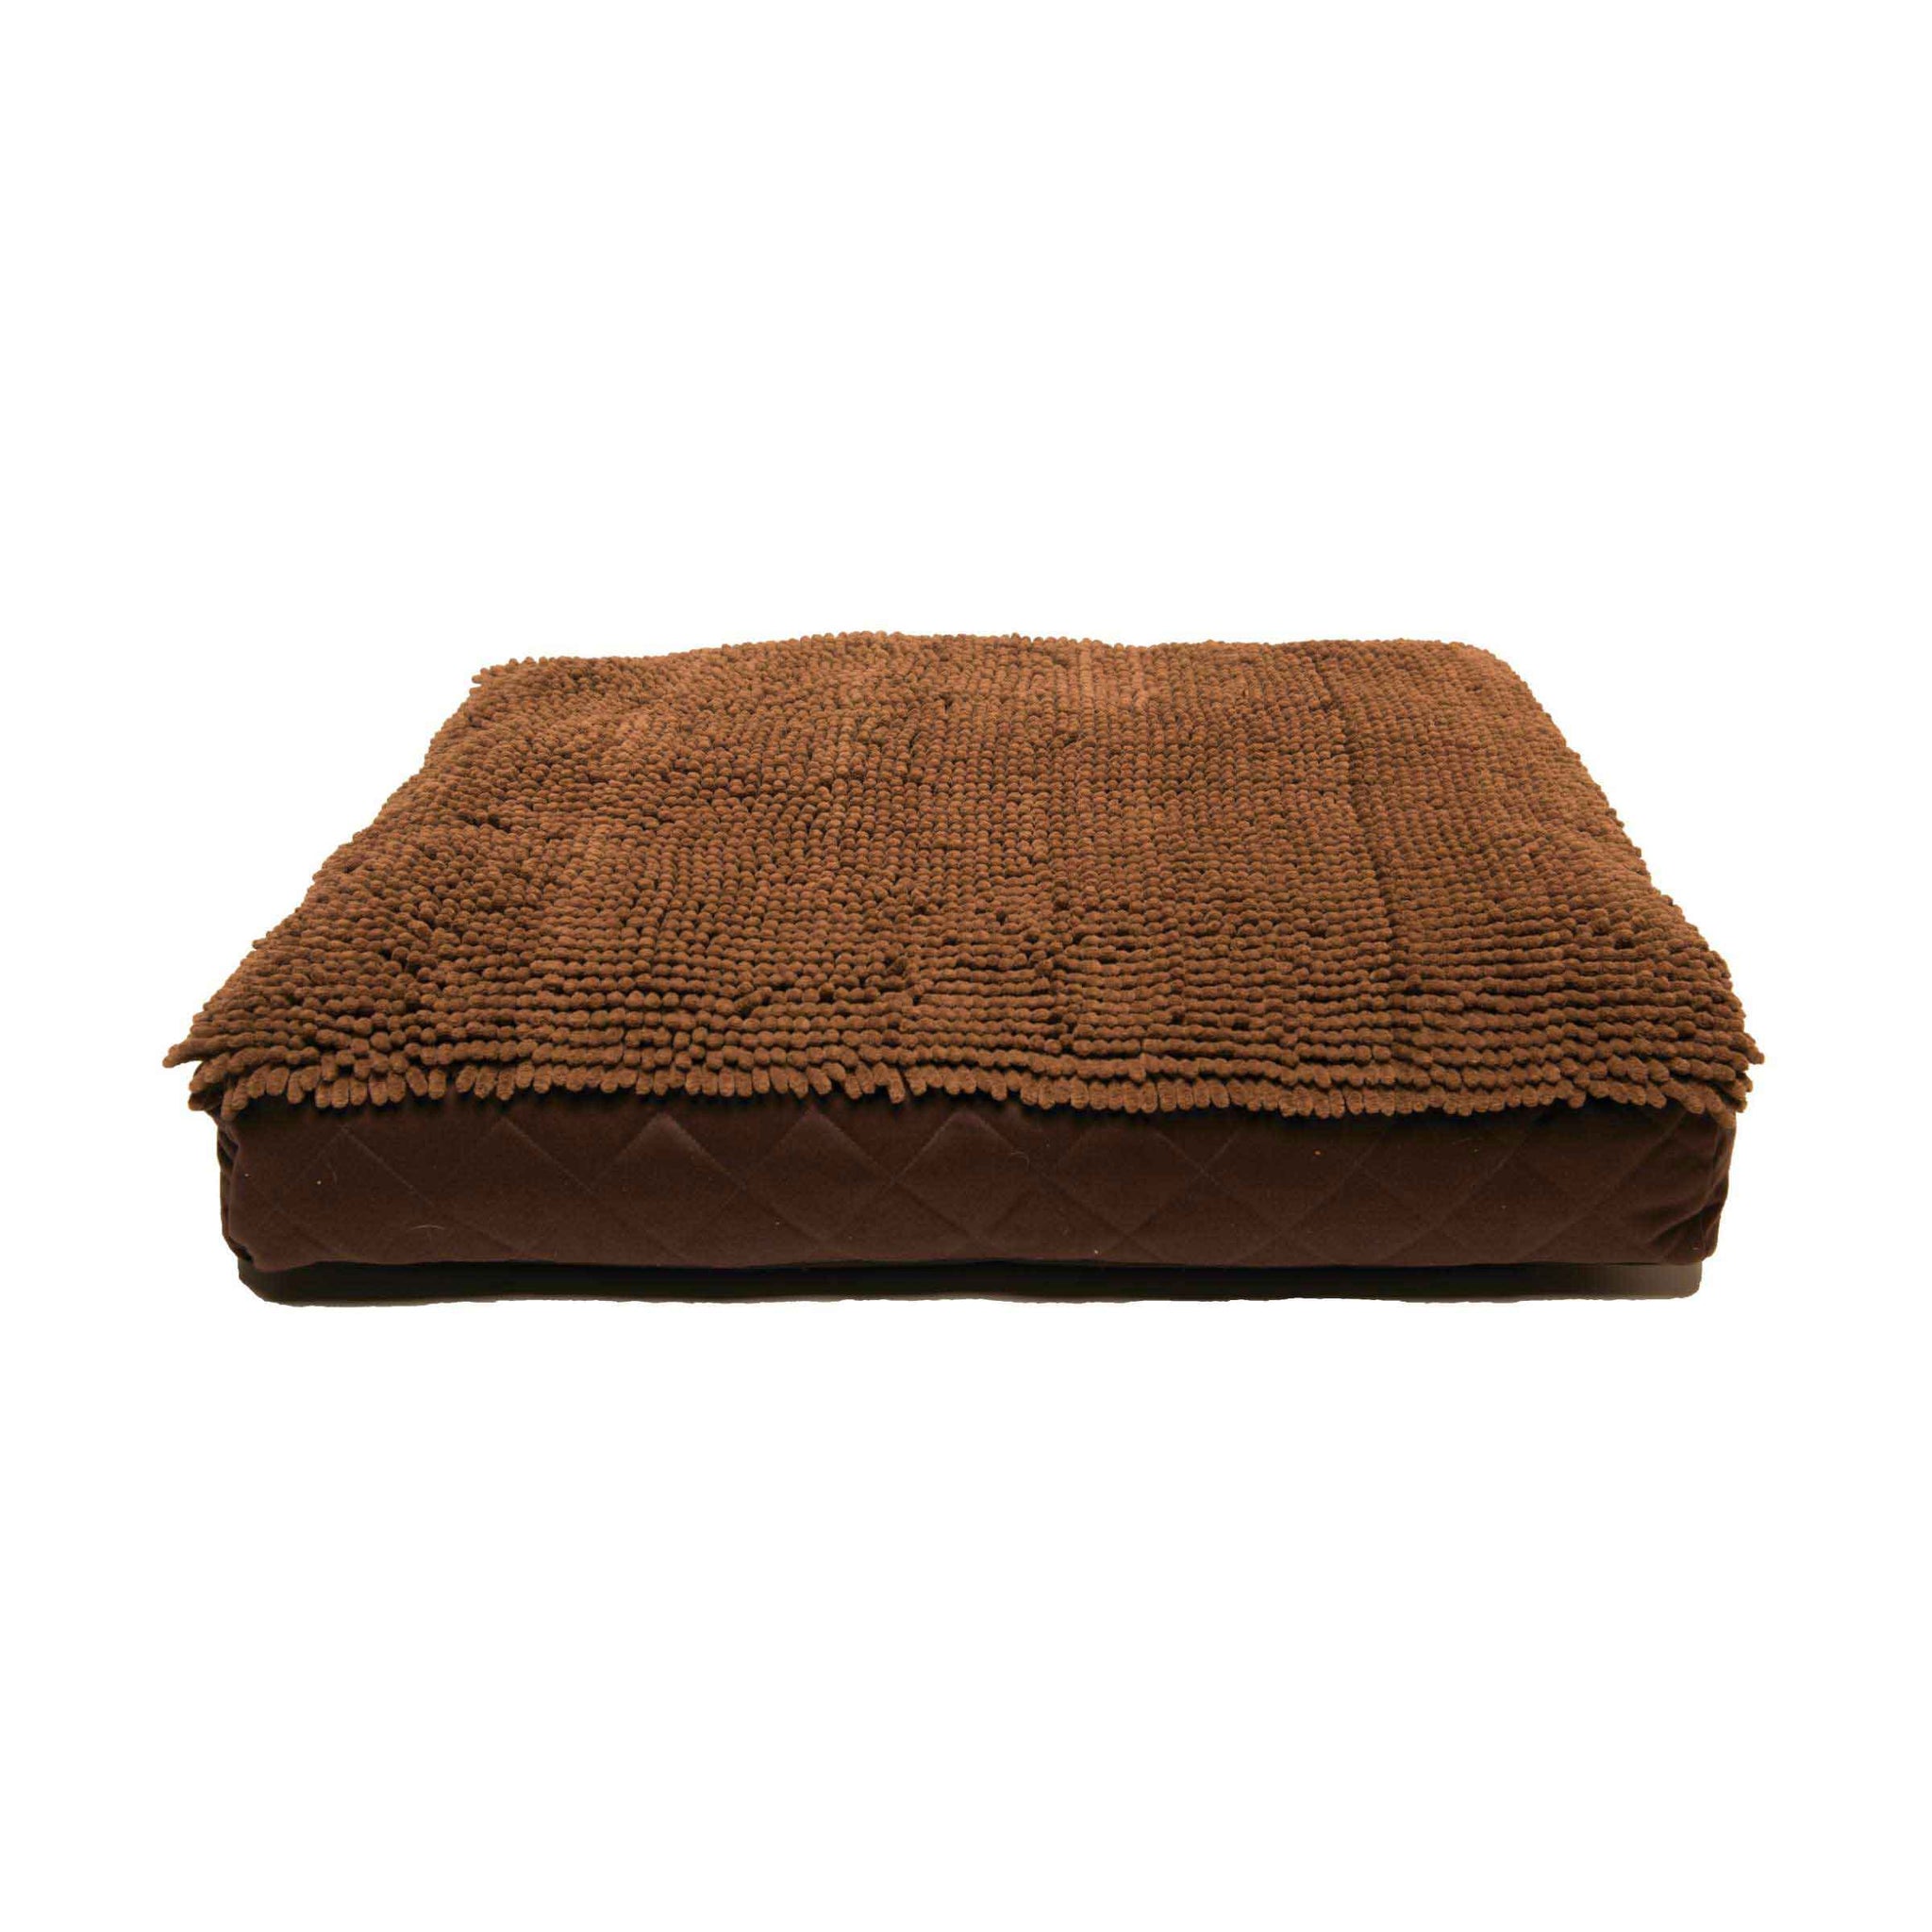 DGS Pet Products Dirty Dog Rectangle Bed Large Brown 28" x 40" x 4"